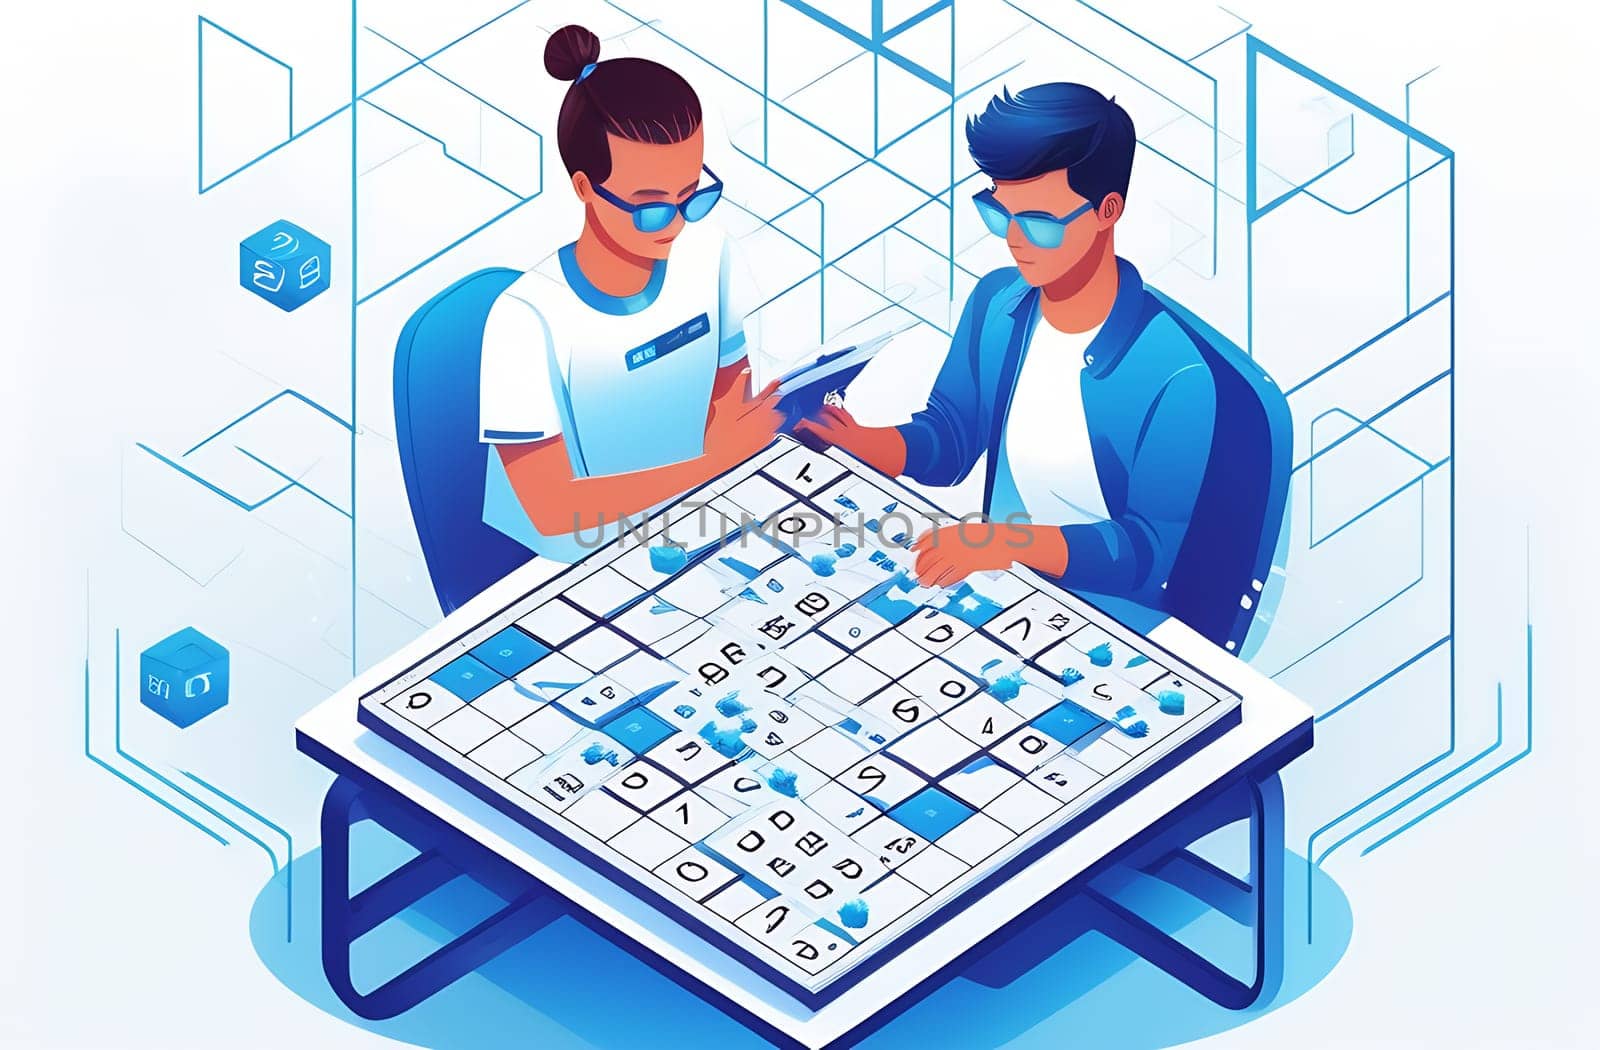 Two teenagers solve a Japanese Sudoku crossword puzzle, illustration on a white background by claire_lucia